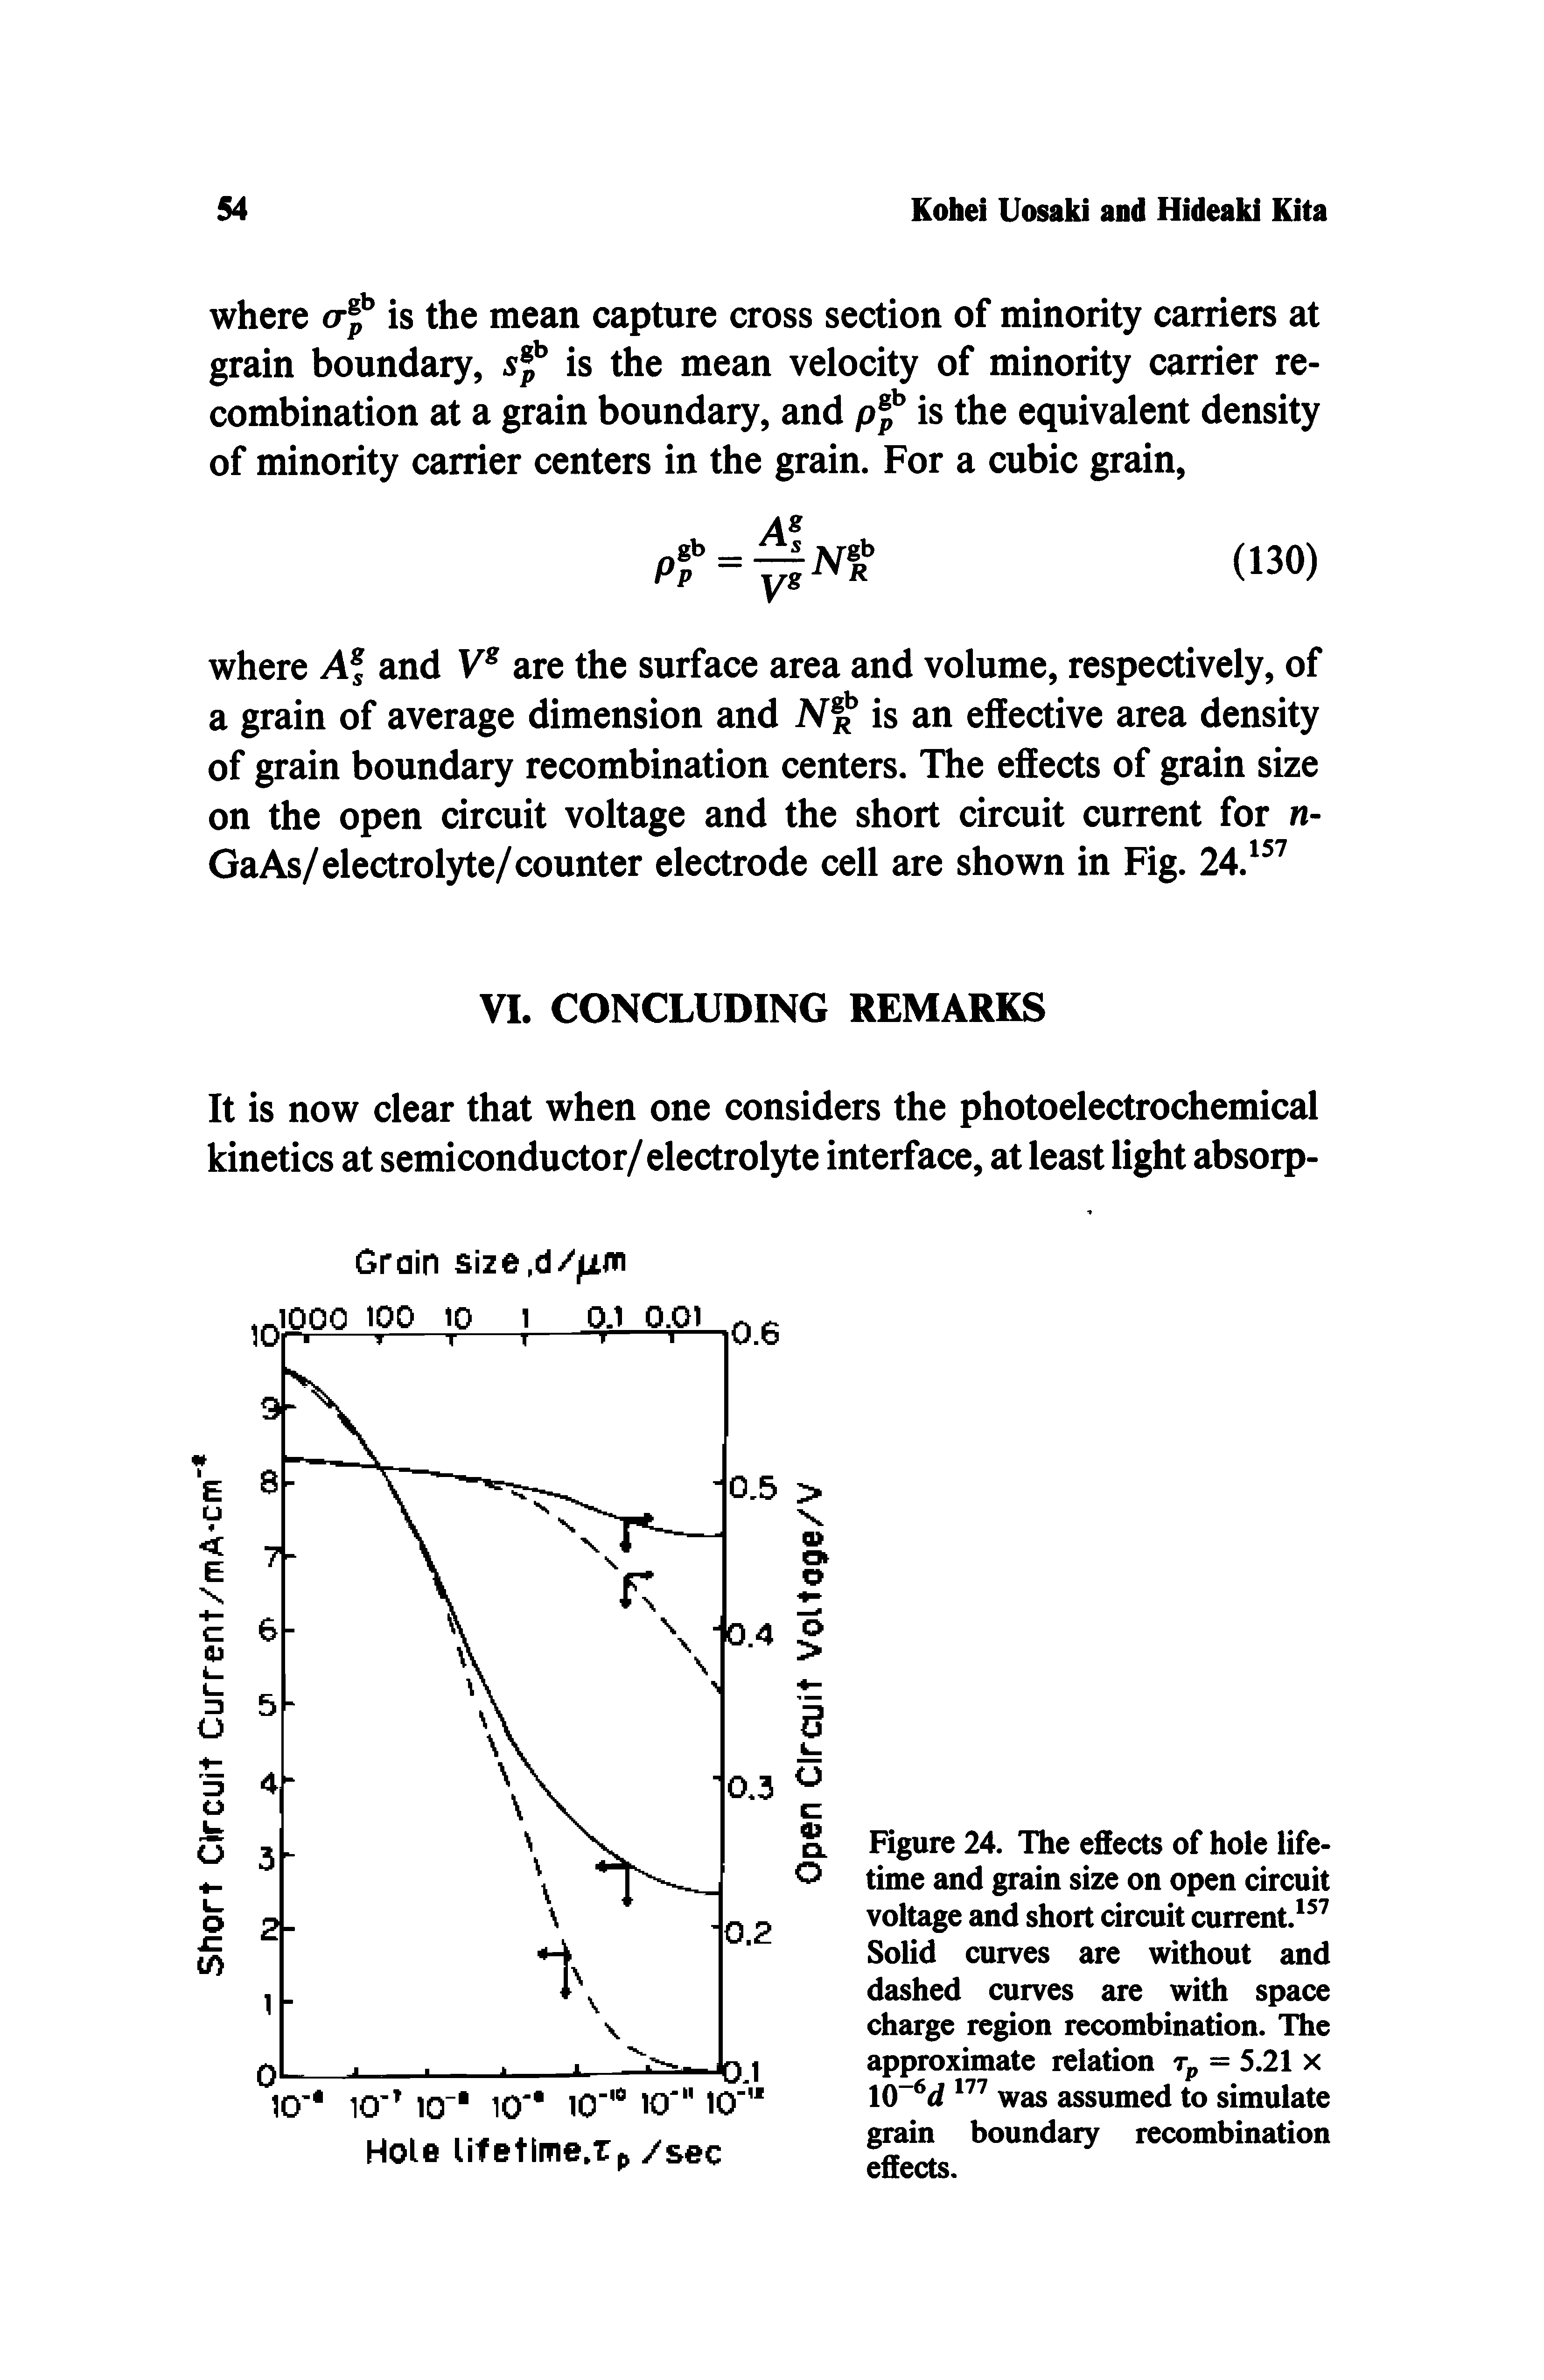 Figure 24. The effects of hole lifetime and grain size on open circuit voltage and short circuit current. Solid curves are without and dashed curves are with space charge region recombination. The approximate relation Tp = 5.21 x 10 d was assumed to simulate grain boundary recombination effects.